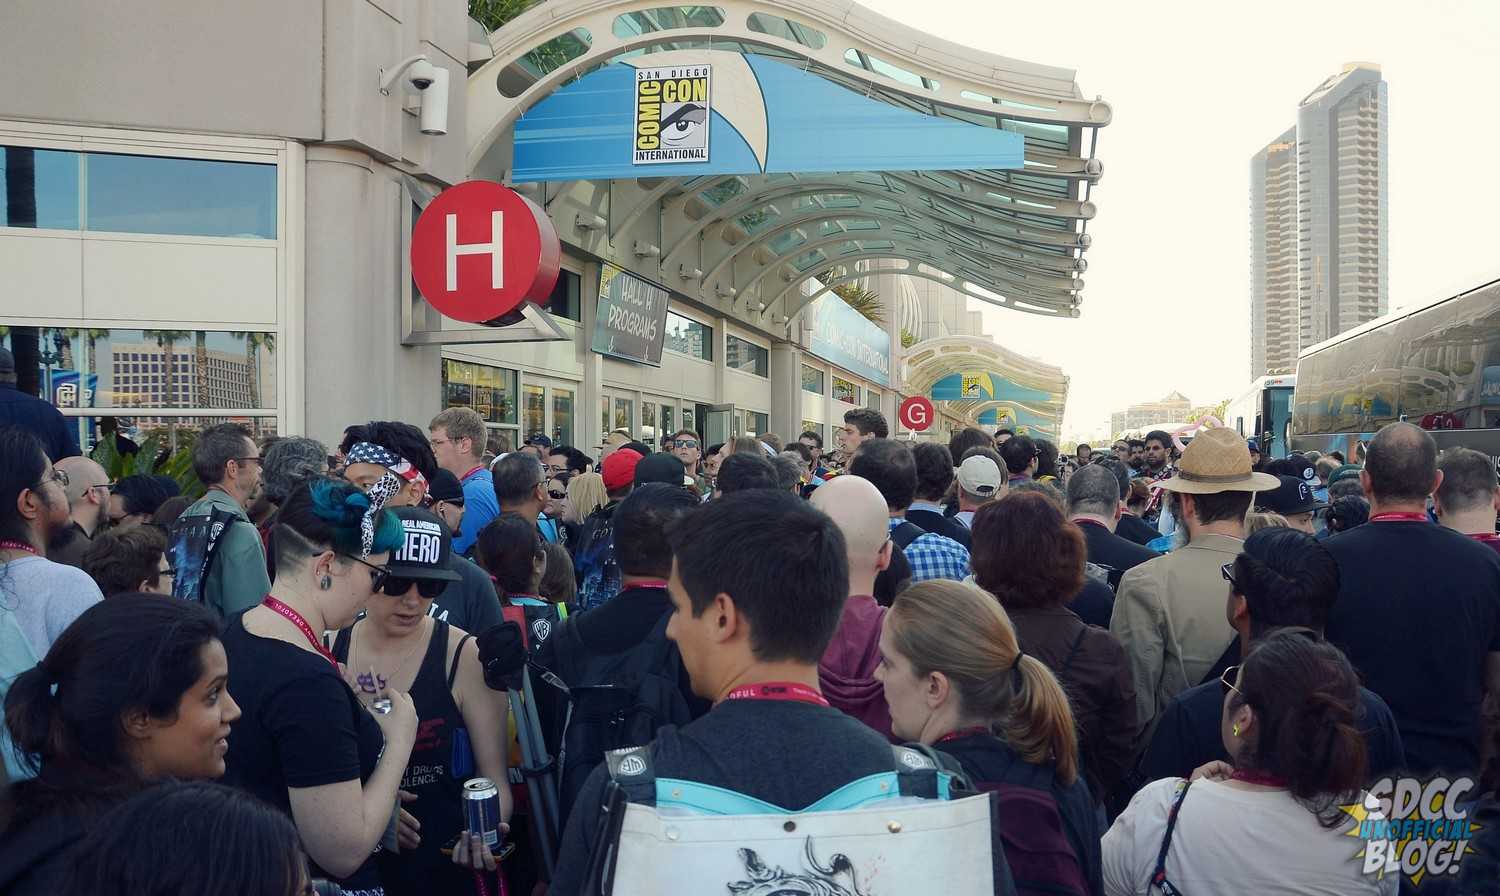 Outside Convention Center - SDCC Crowd Hall H